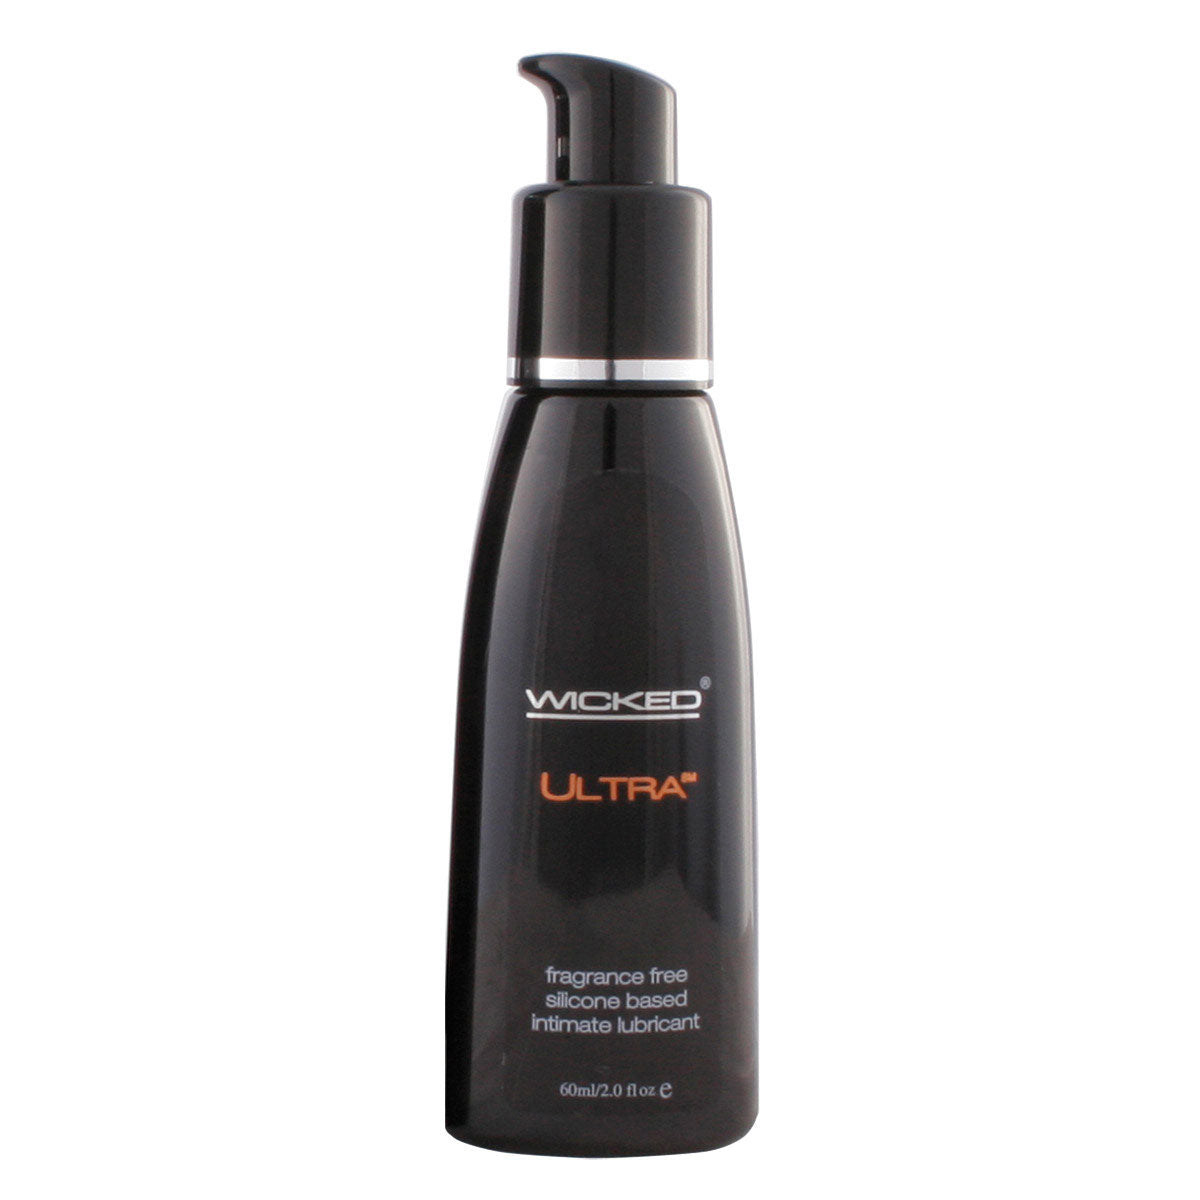 Wicked Sensual Care Ultra Fragrance-Free Silicone Lubricant 2oz